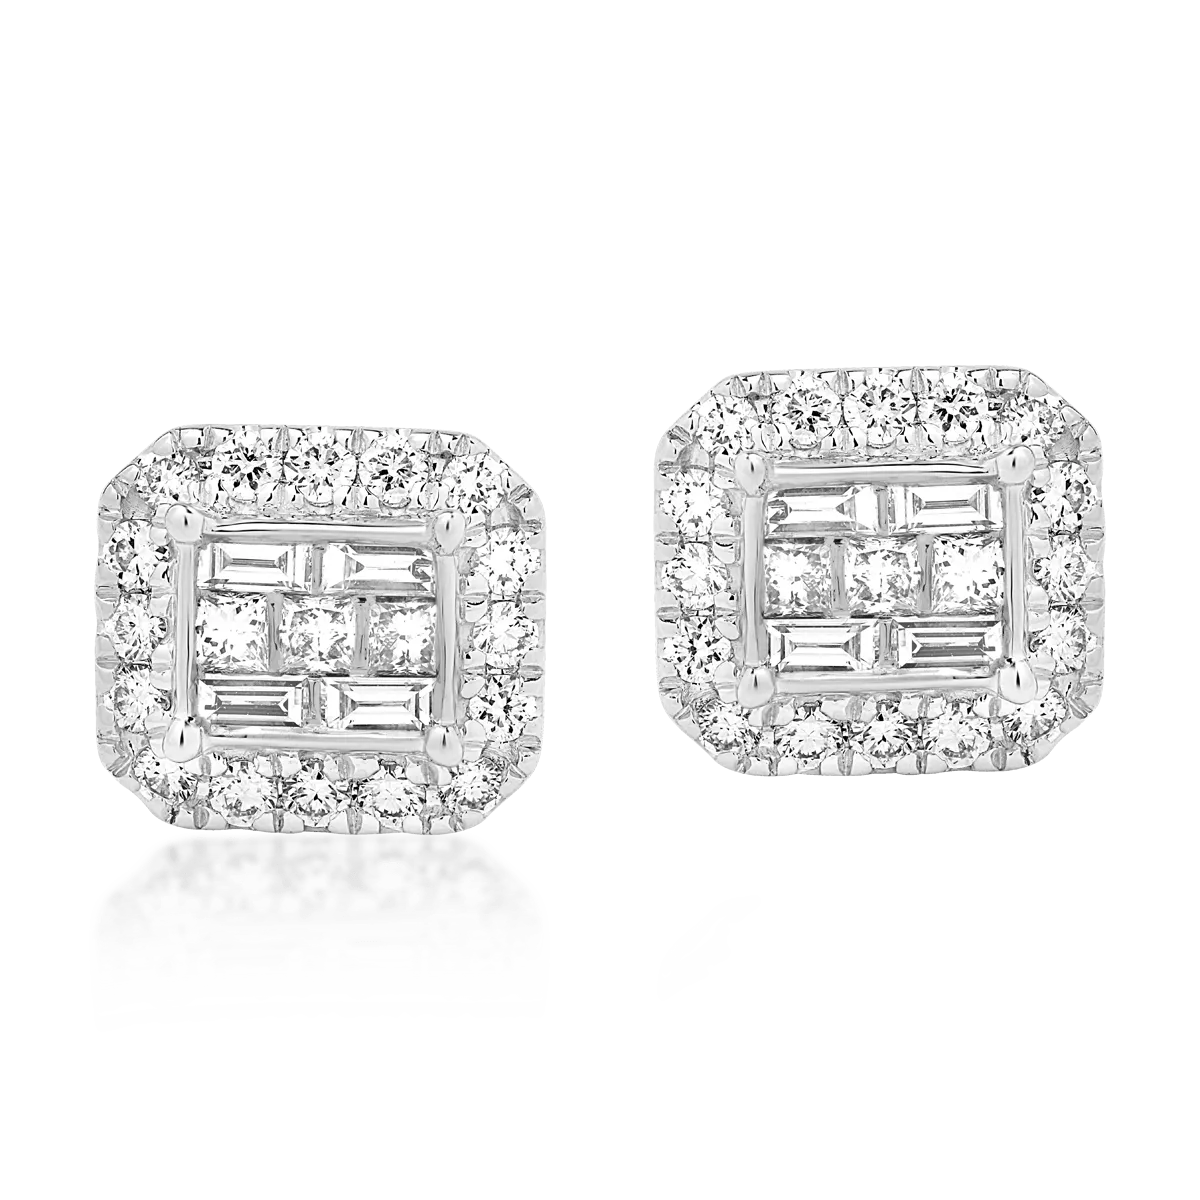 18K white gold earrings with 0.59ct diamonds